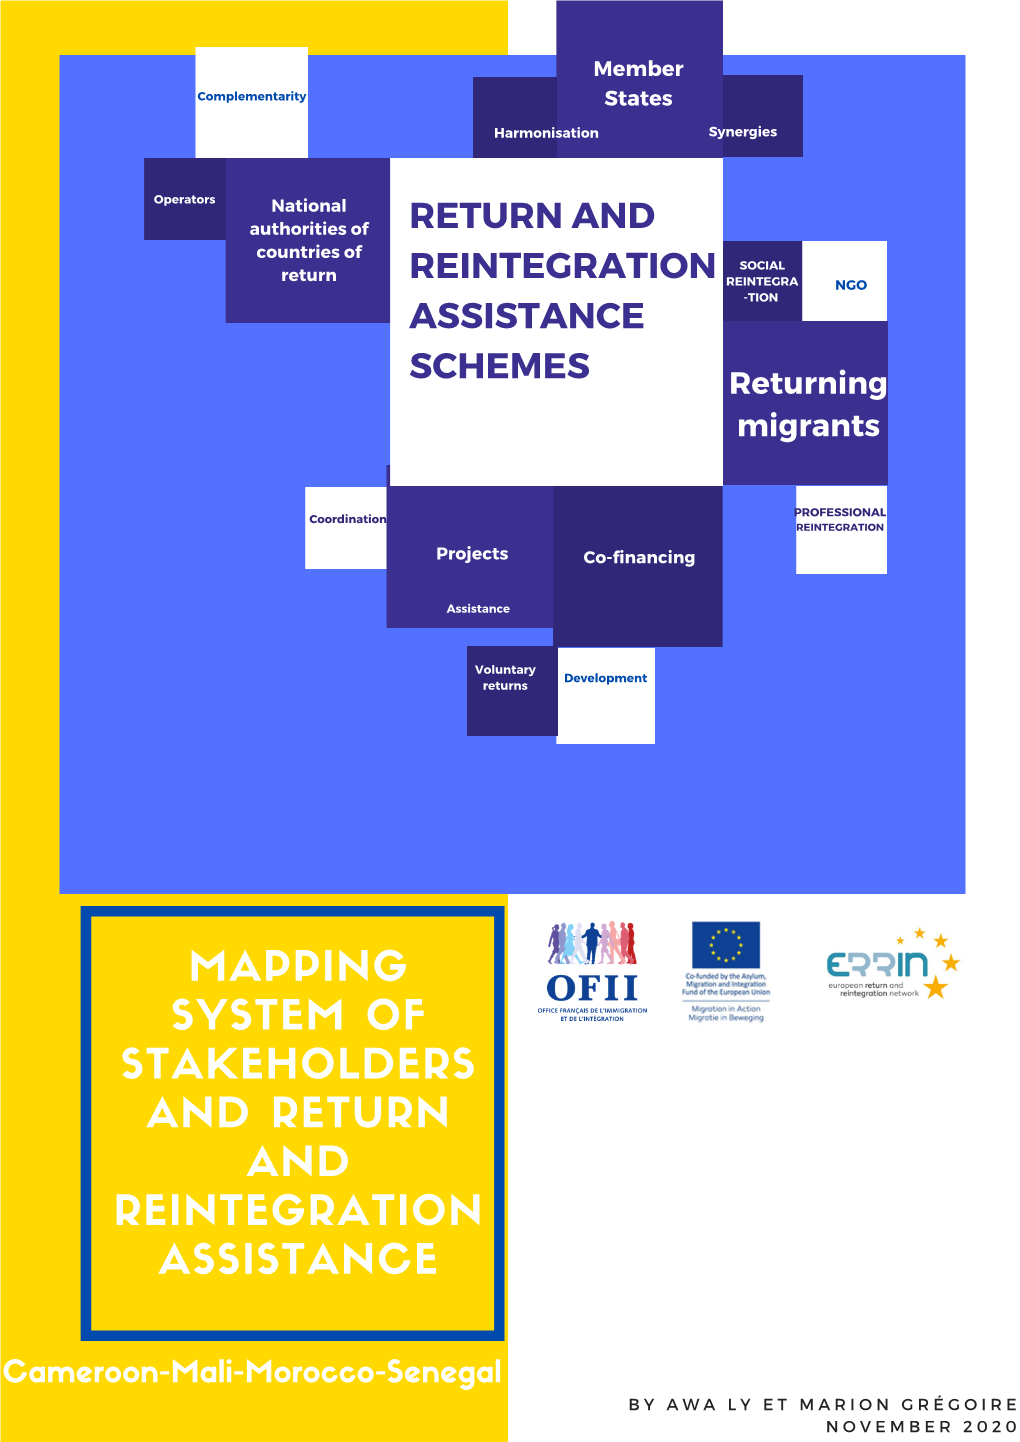 Mapping System of Stakeholders and Return and Reintegration Assistance